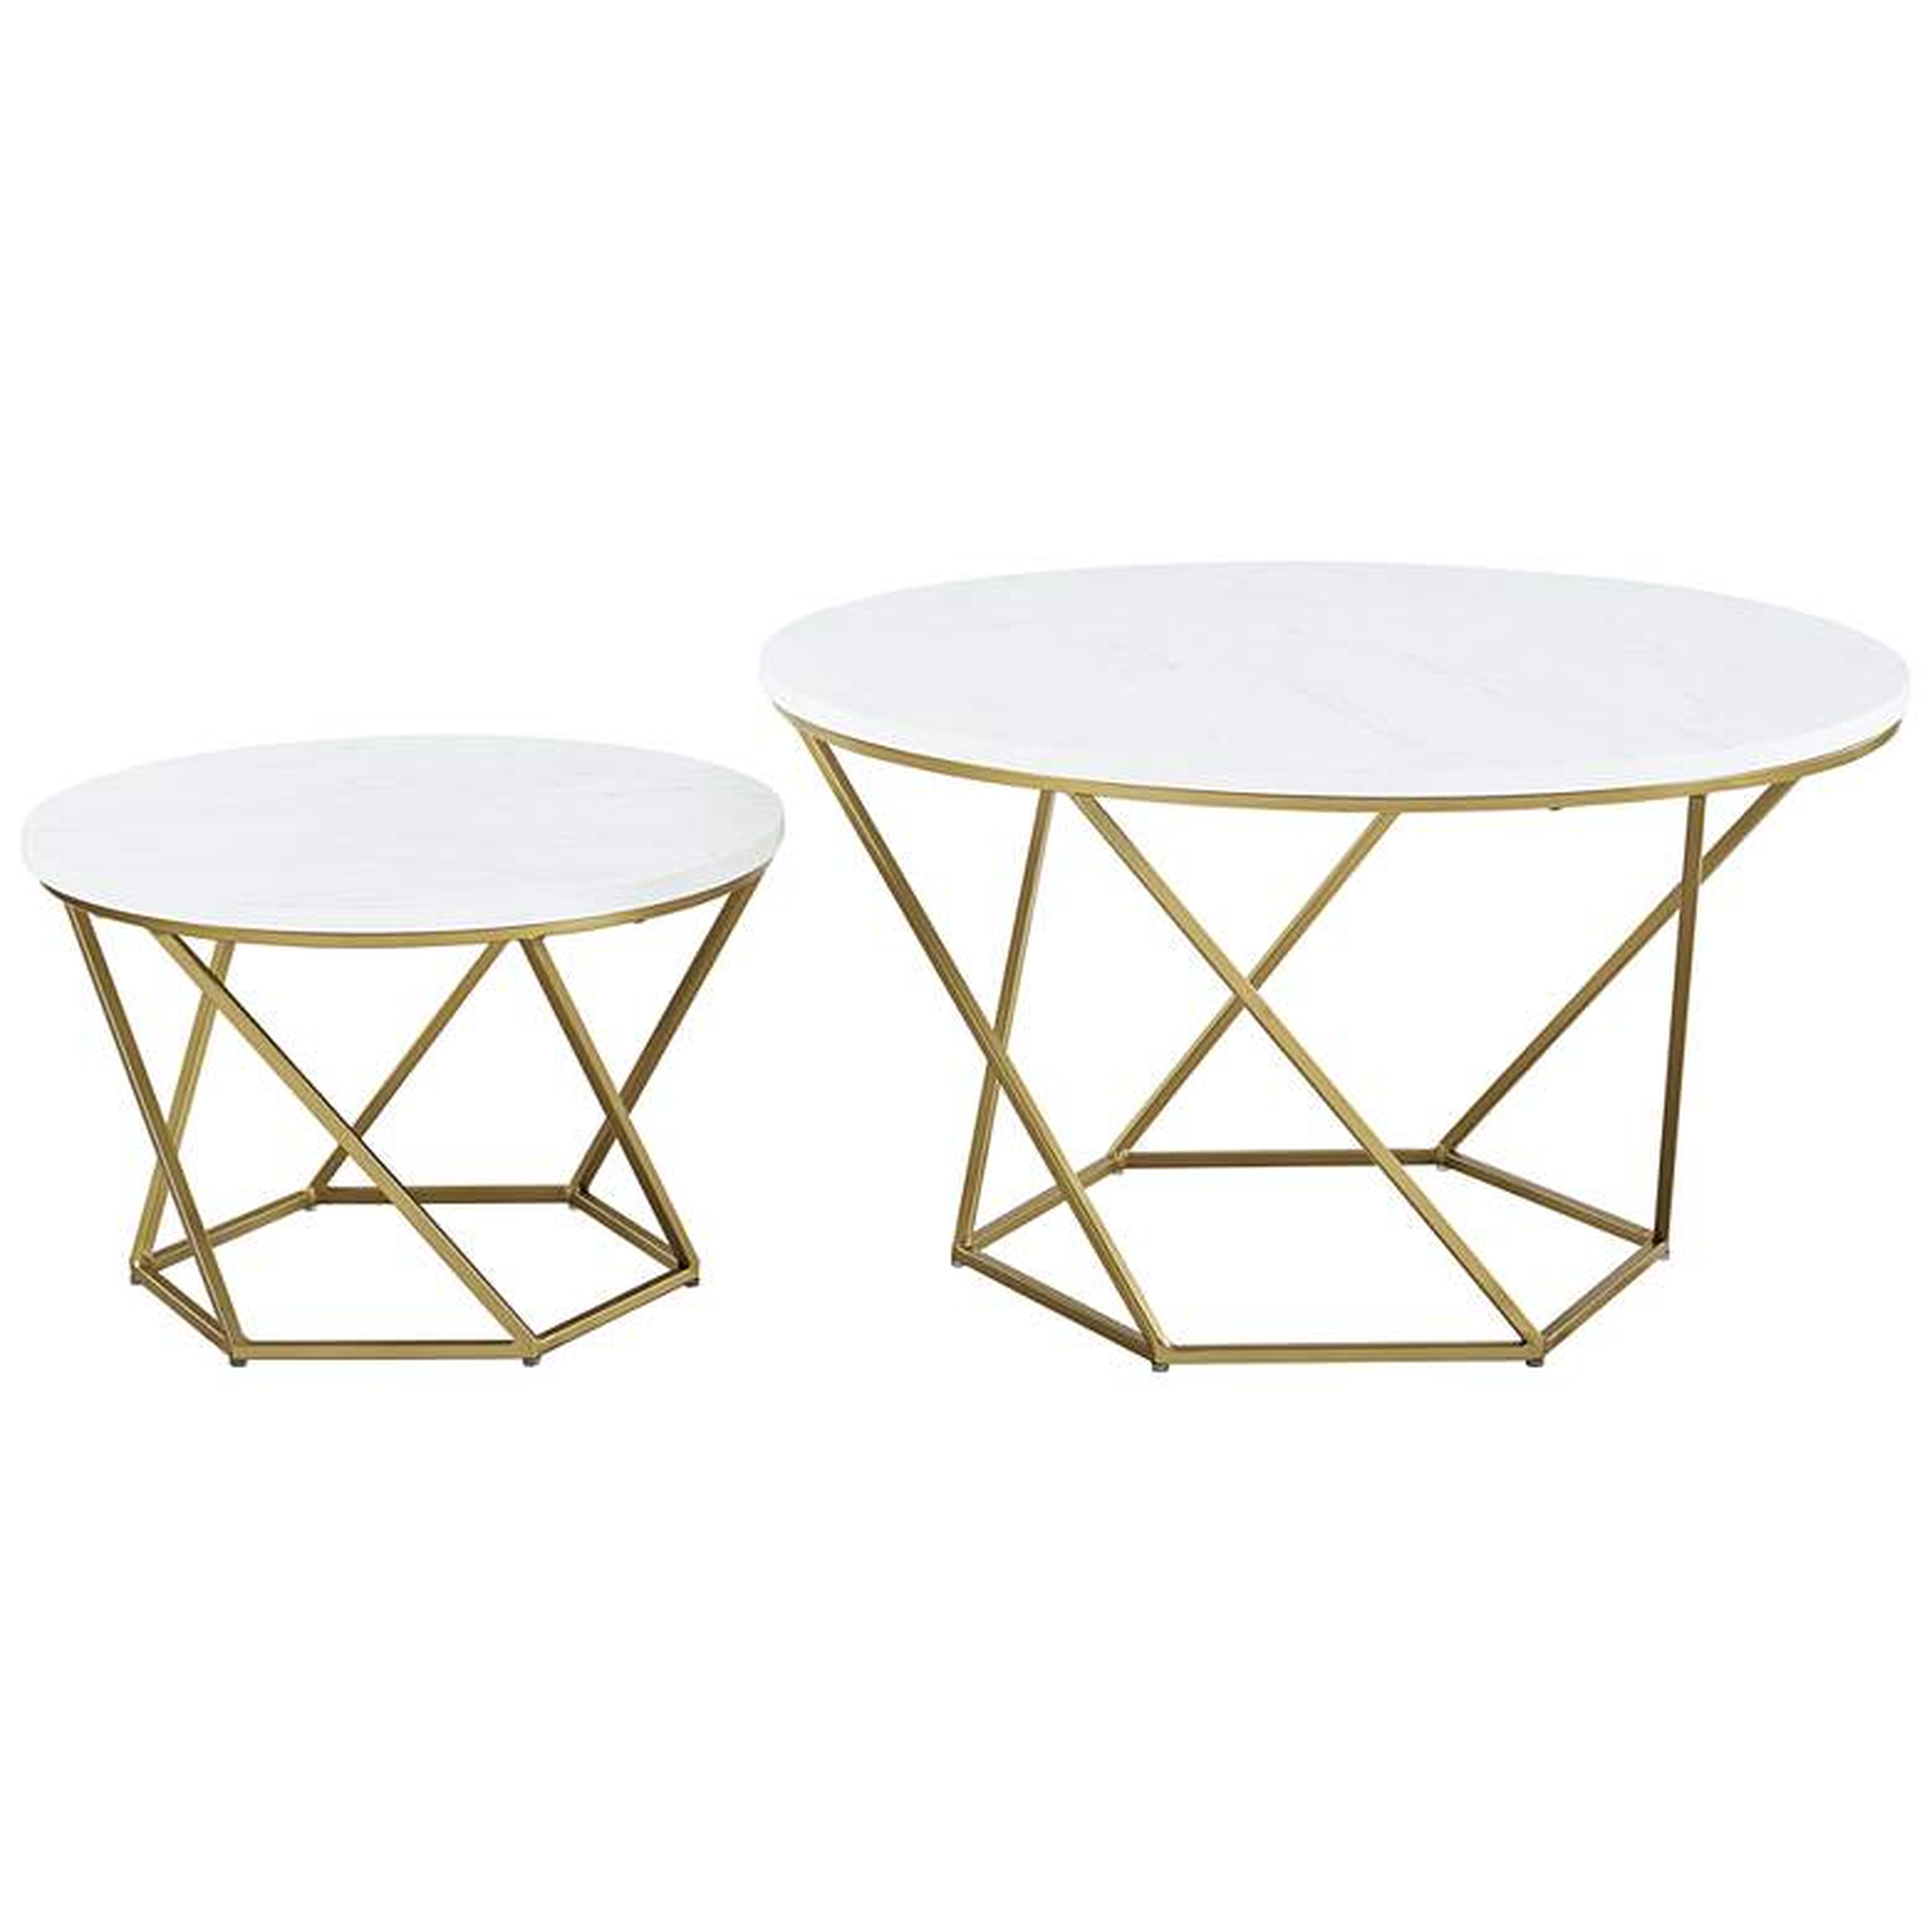 Geometric White Marble Top Nesting Coffee Tables Set of 2 - Style # 64J67 - Lamps Plus